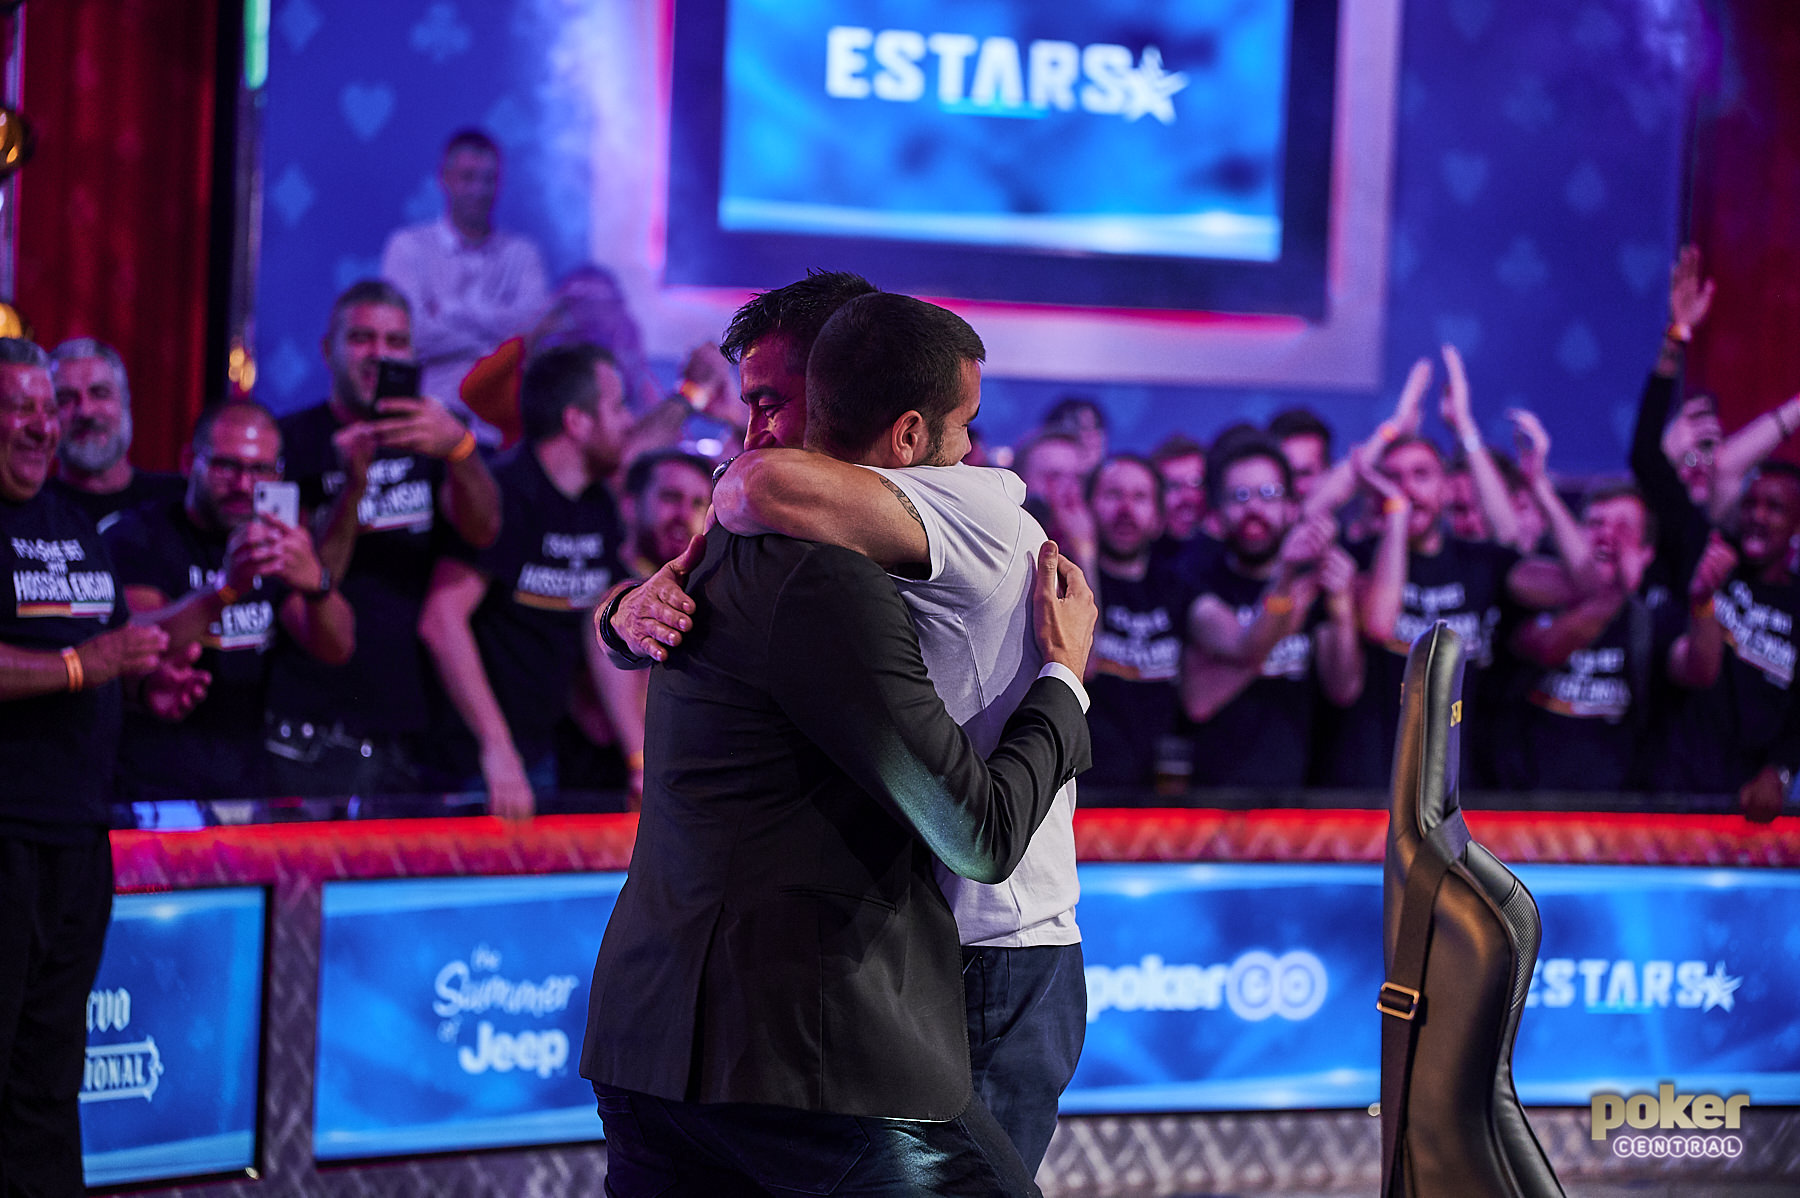 Dario Sammartino and Hossein Ensan embrace each other after the latter took down the 2019 WSOp Main Event for $10,000,000.